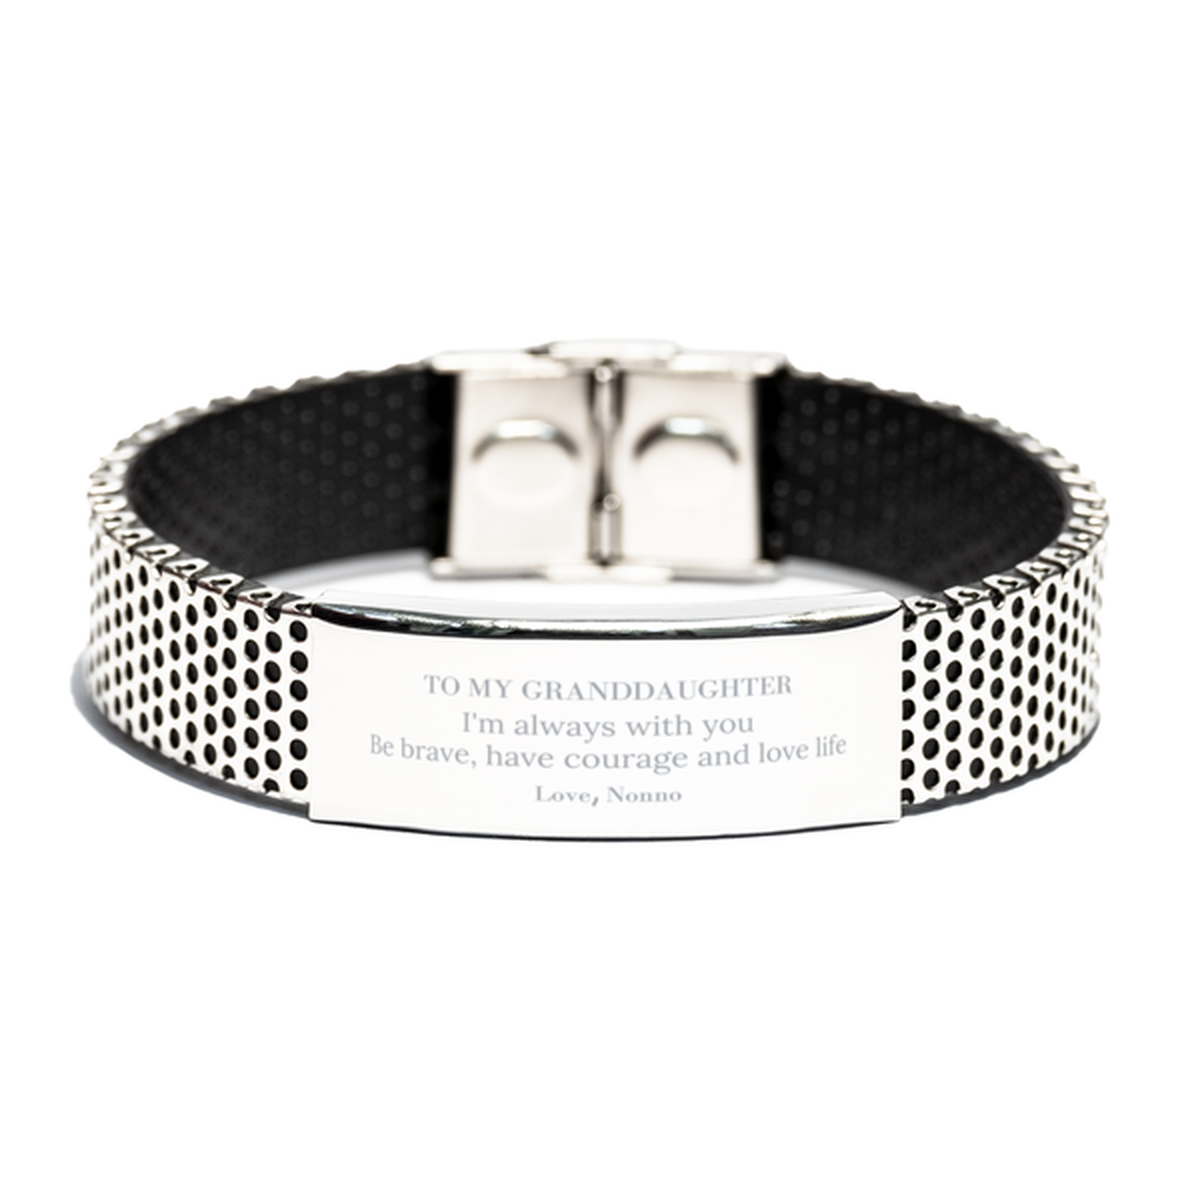 To My Granddaughter Gifts from Nonno, Unique Stainless Steel Bracelet Inspirational Christmas Birthday Graduation Gifts for Granddaughter I'm always with you. Be brave, have courage and love life. Love, Nonno